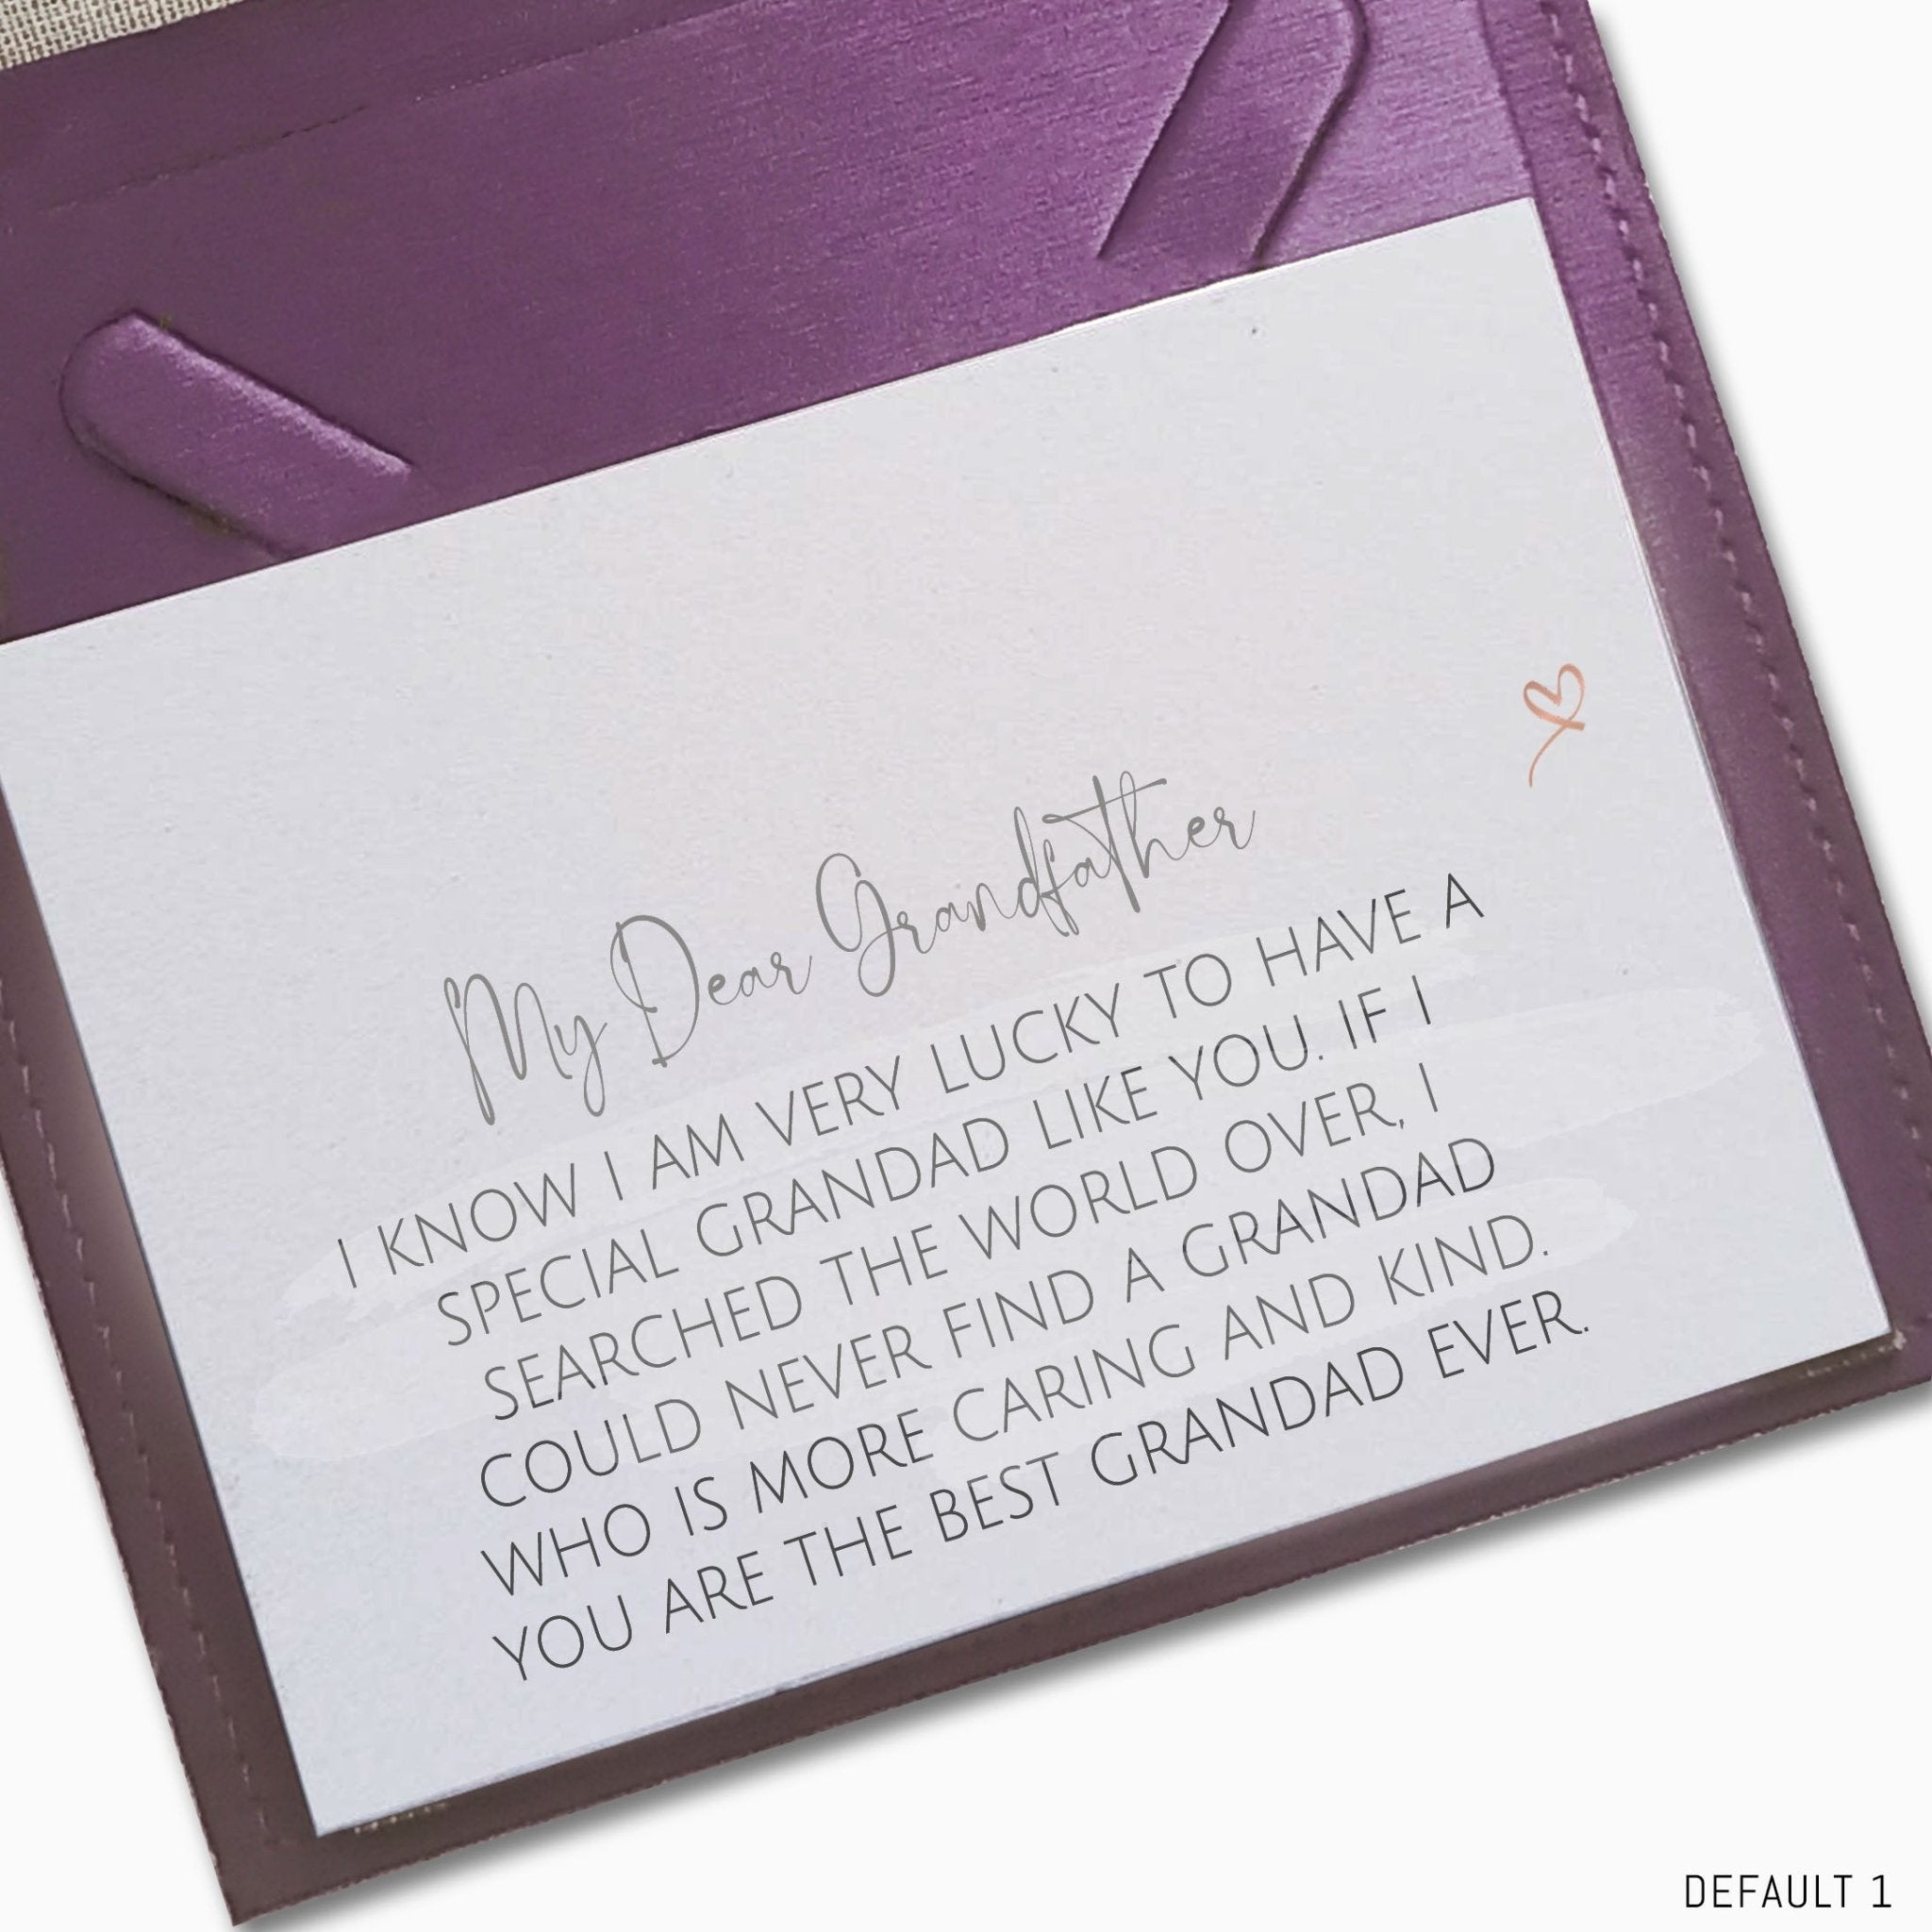 My Dear Grandfather - Message Card - Message Cards